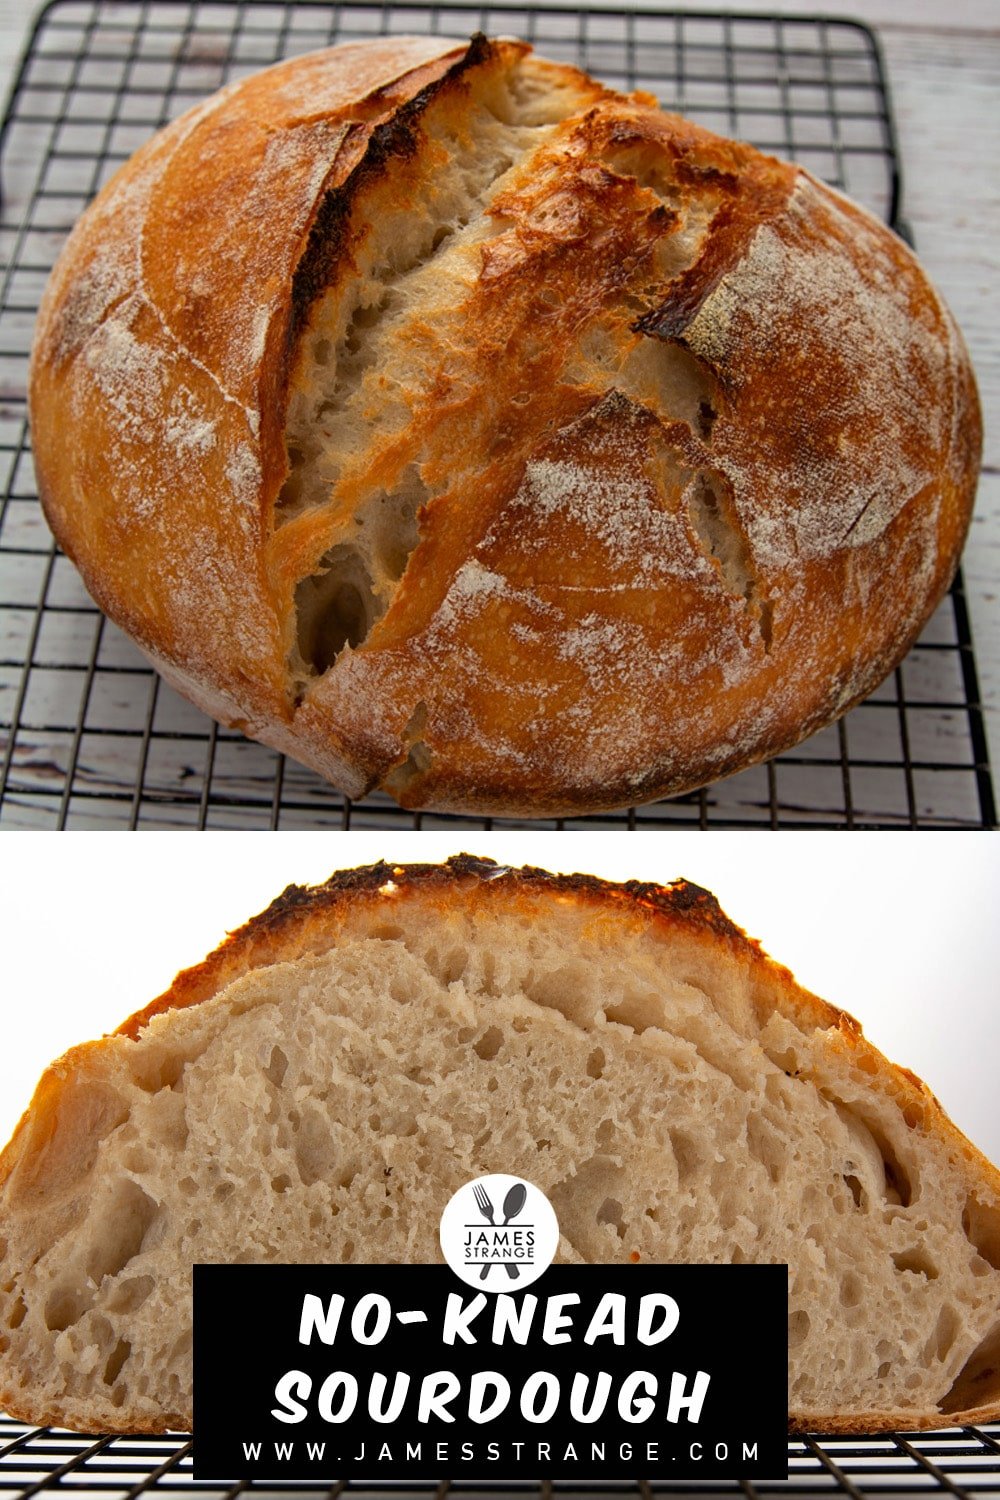 One whole loaf of bread and one cut in half. This is a pin for pinterest